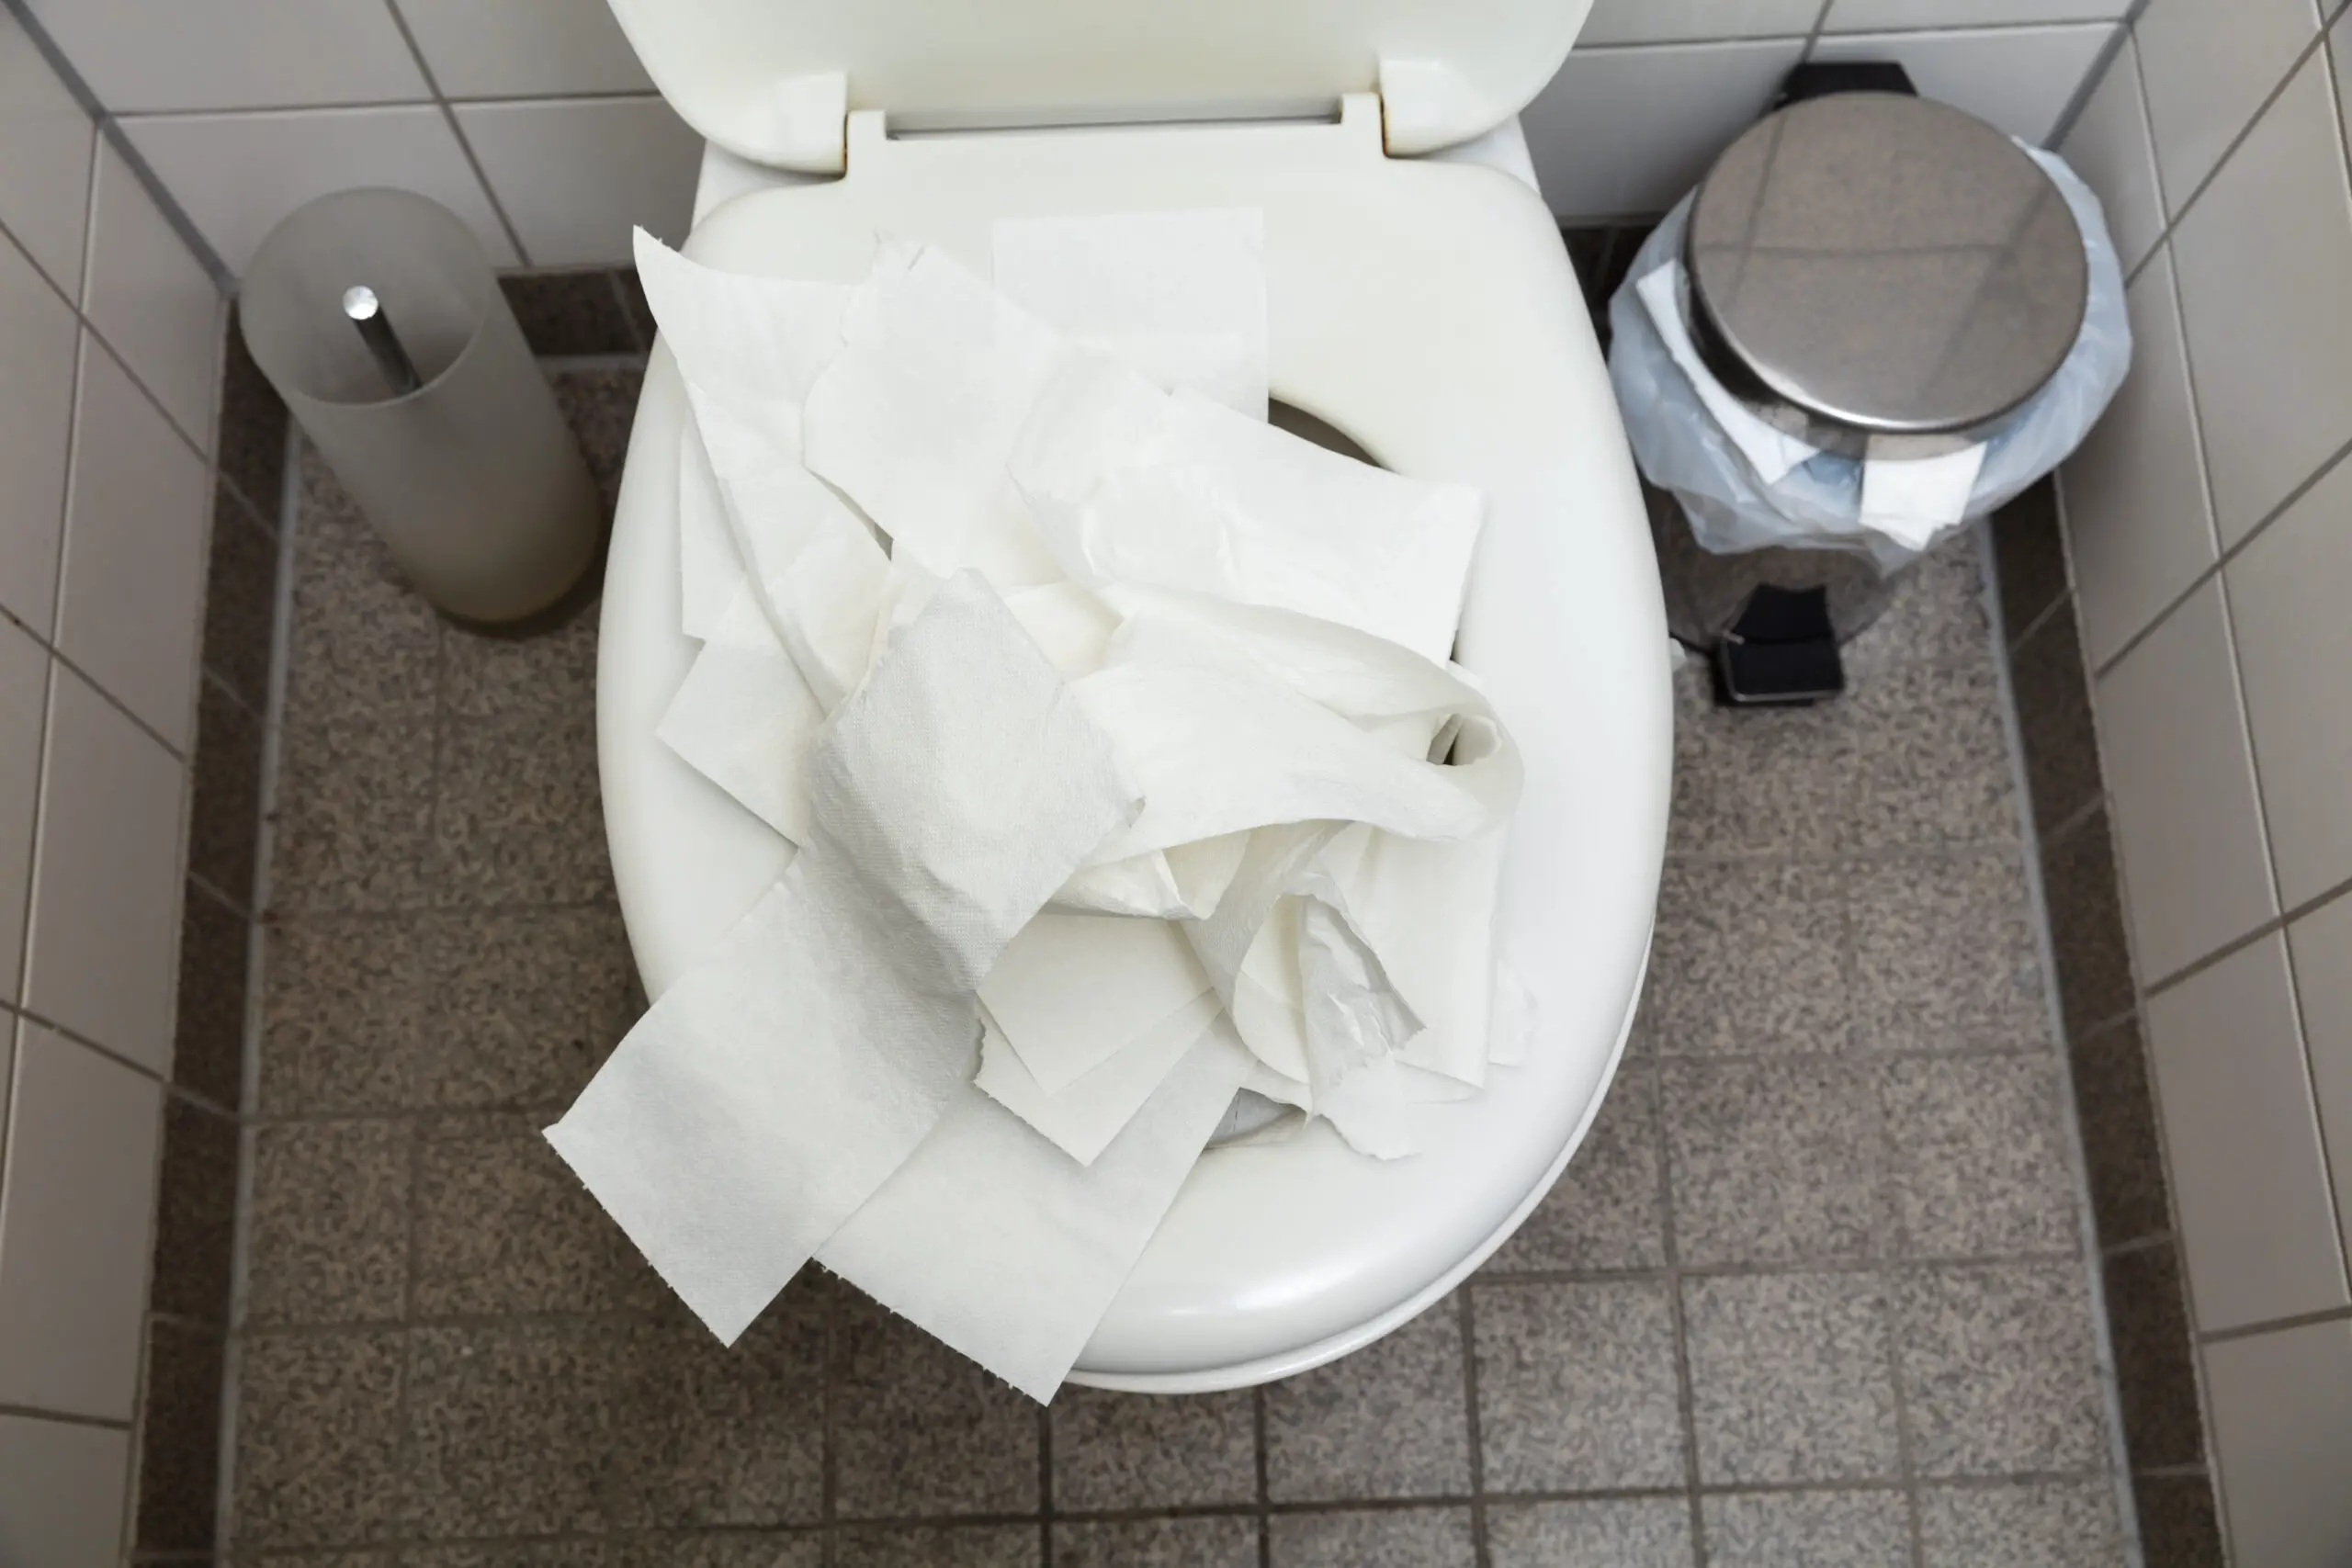 An Overhead View Of Used Crumpled White Toilet Paper Inside The Toilet Bowl